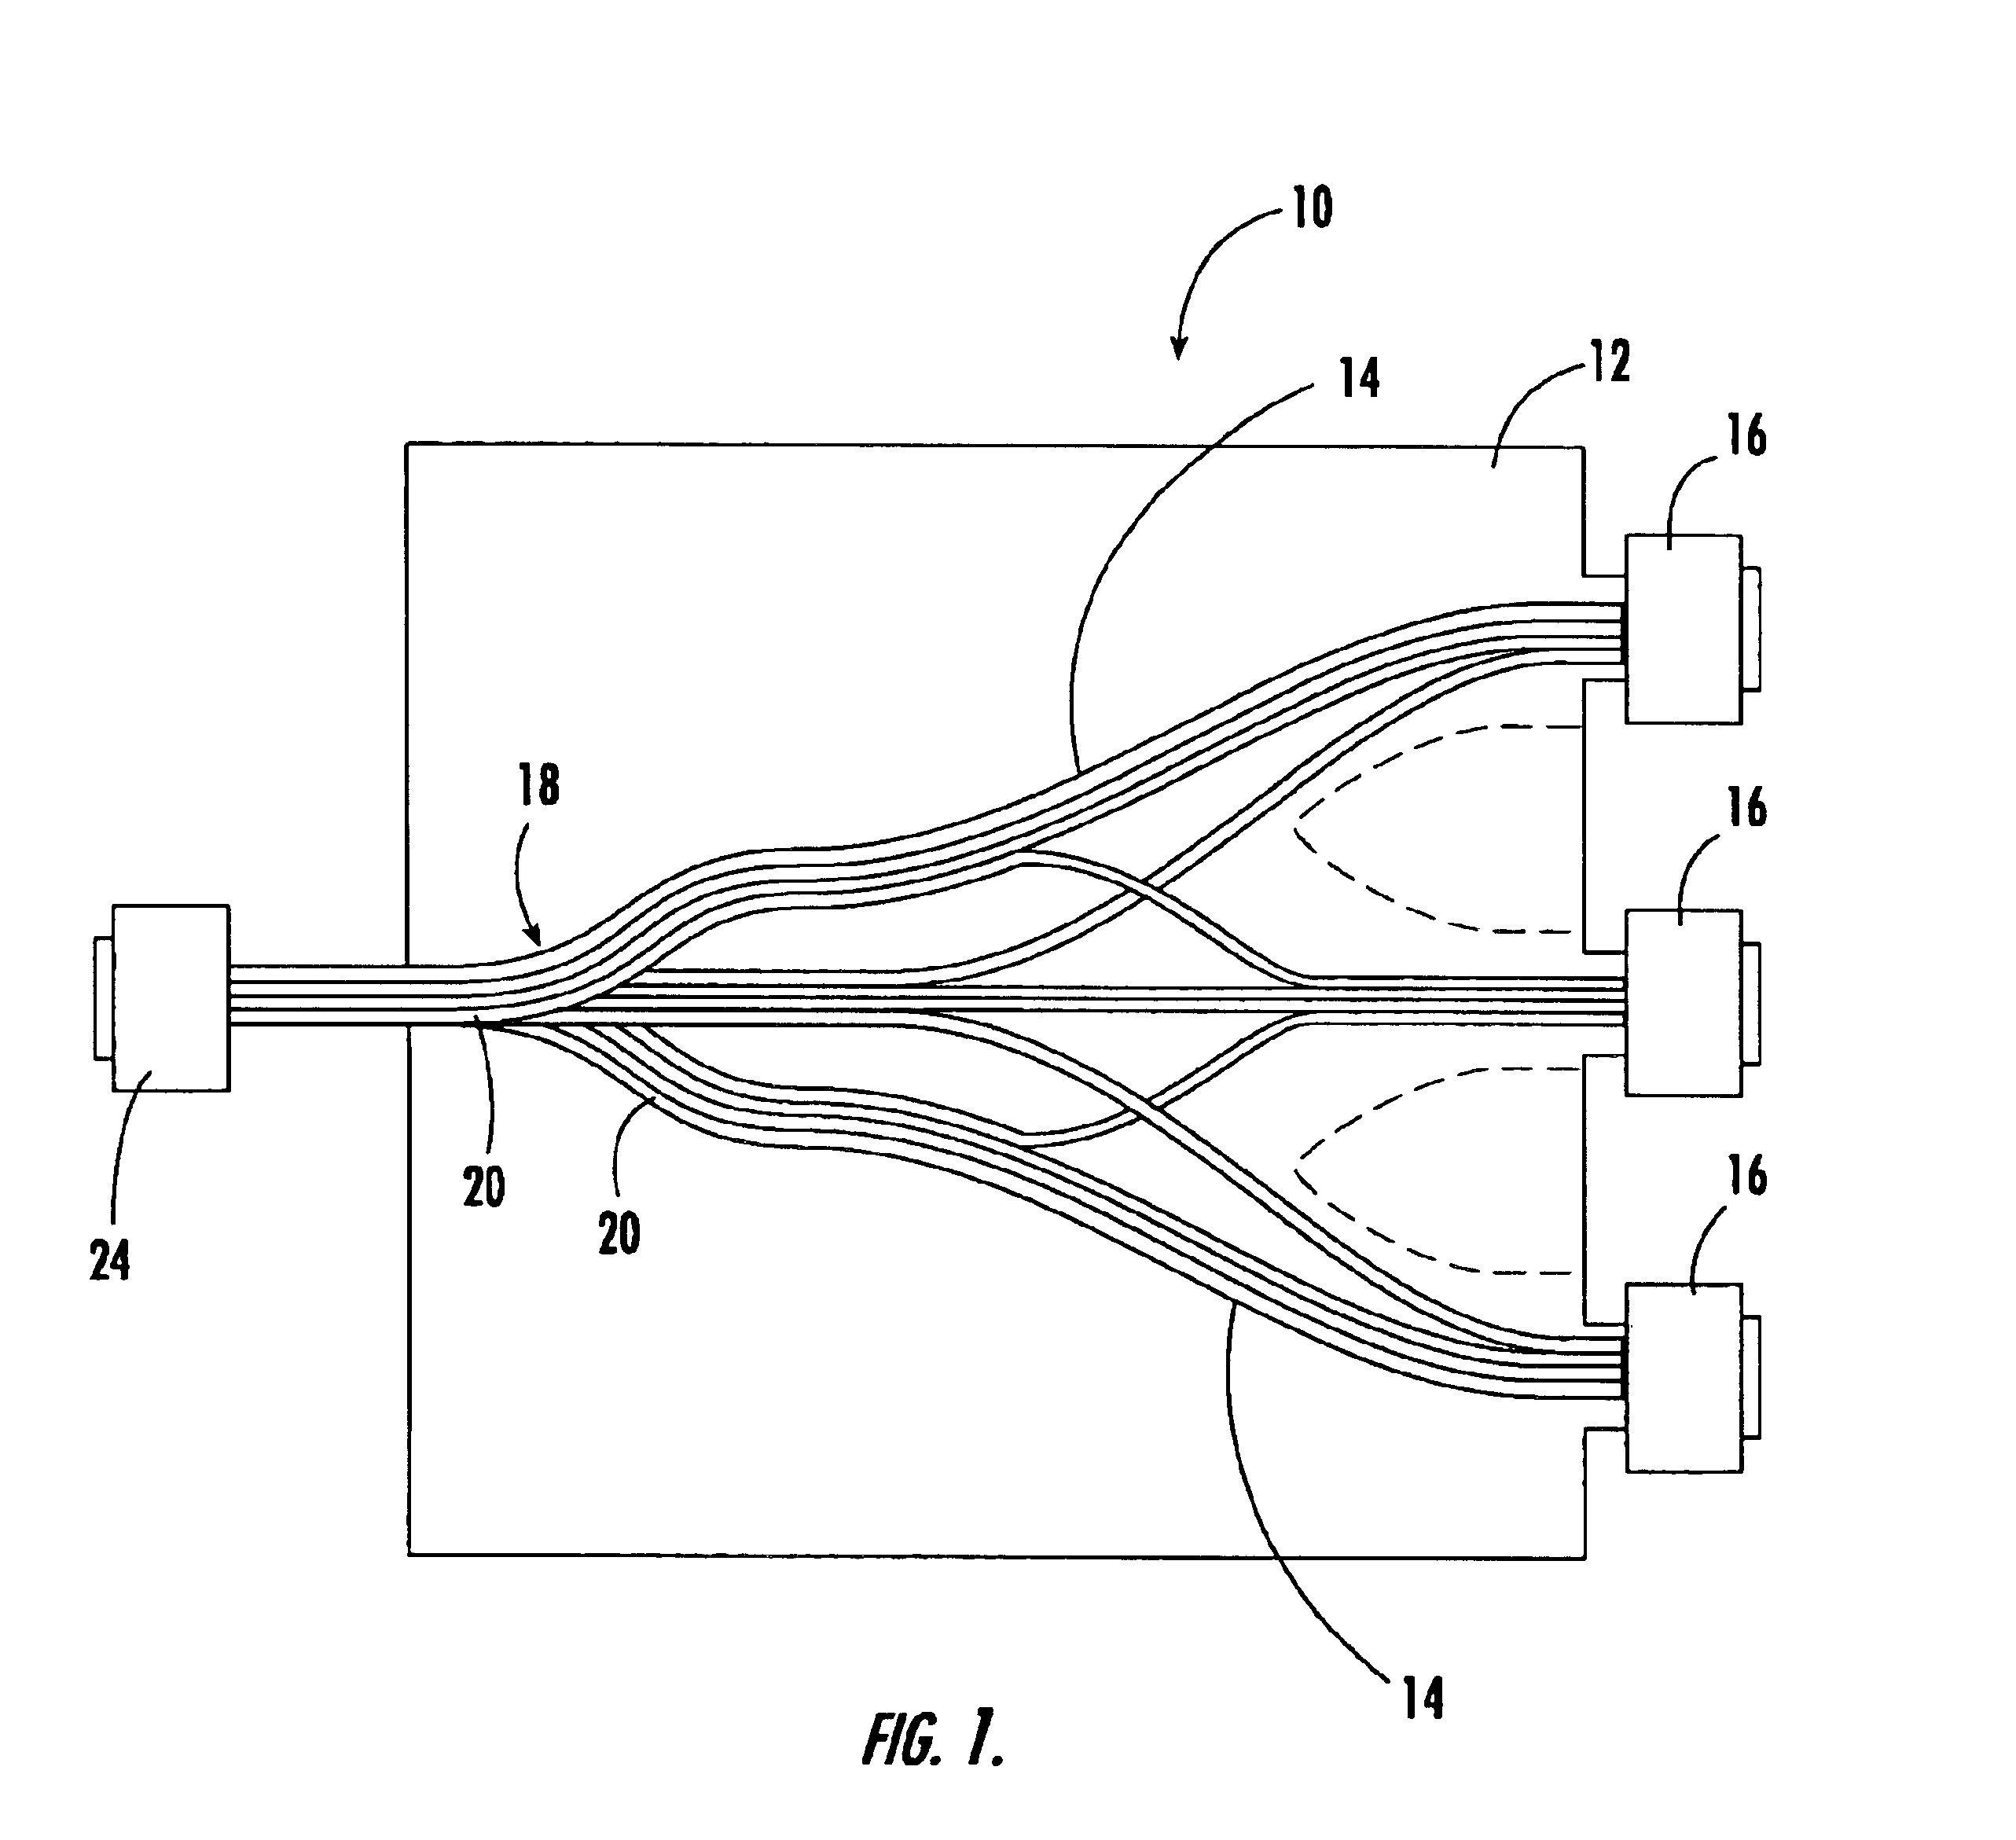 Optical circuit having legs in a stacked configuration and an associated fabrication method